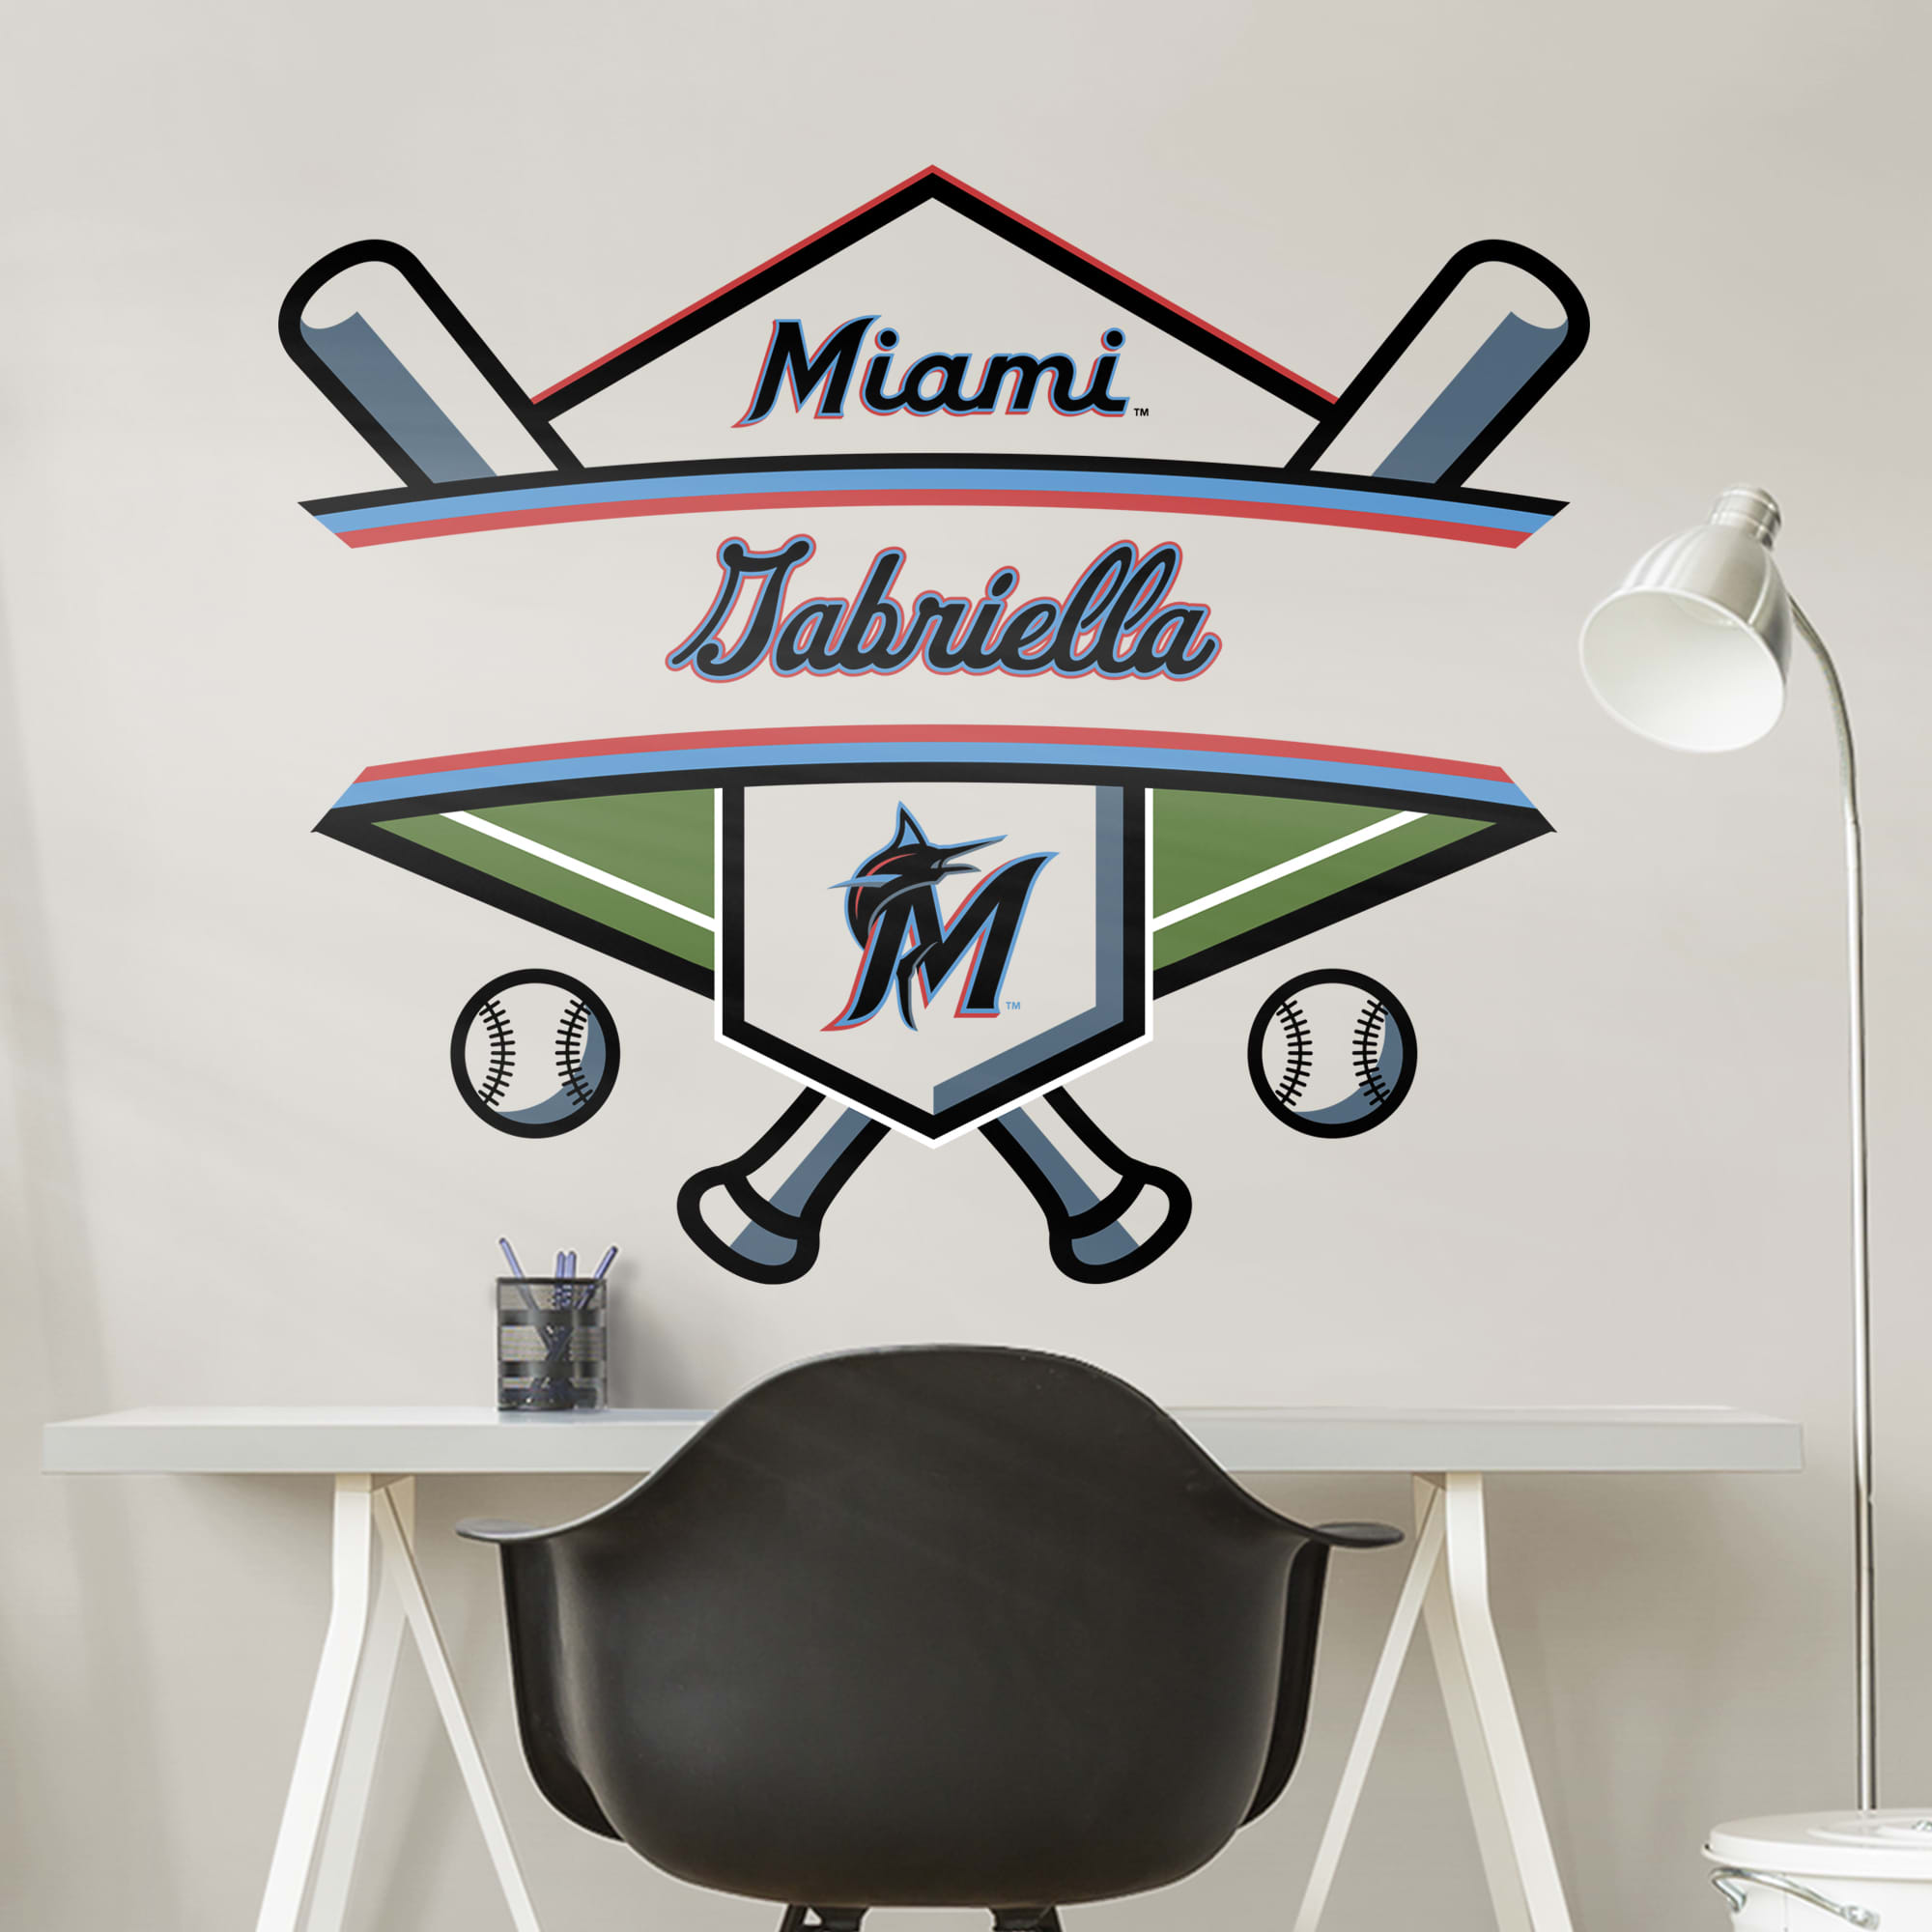 Miami Marlins: Personalized Name - Officially Licensed MLB Transfer Decal 45.0"W x 39.0"H by Fathead | Vinyl